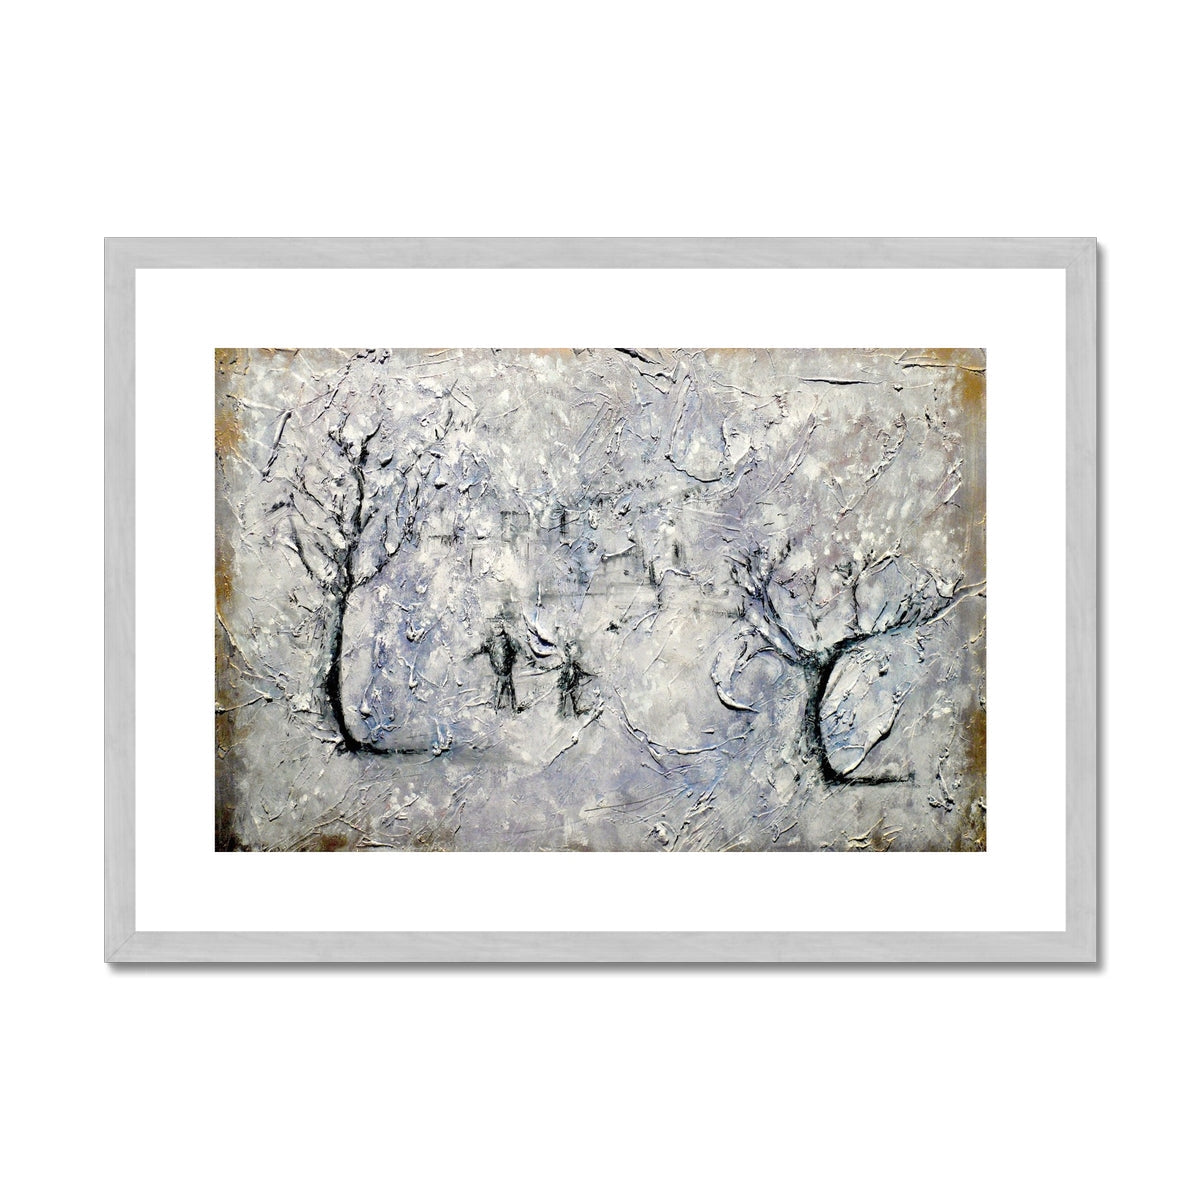 Father Daughter Snow Painting | Antique Framed & Mounted Prints From Scotland-Antique Framed & Mounted Prints-Abstract & Impressionistic Art Gallery-A2 Landscape-Silver Frame-Paintings, Prints, Homeware, Art Gifts From Scotland By Scottish Artist Kevin Hunter